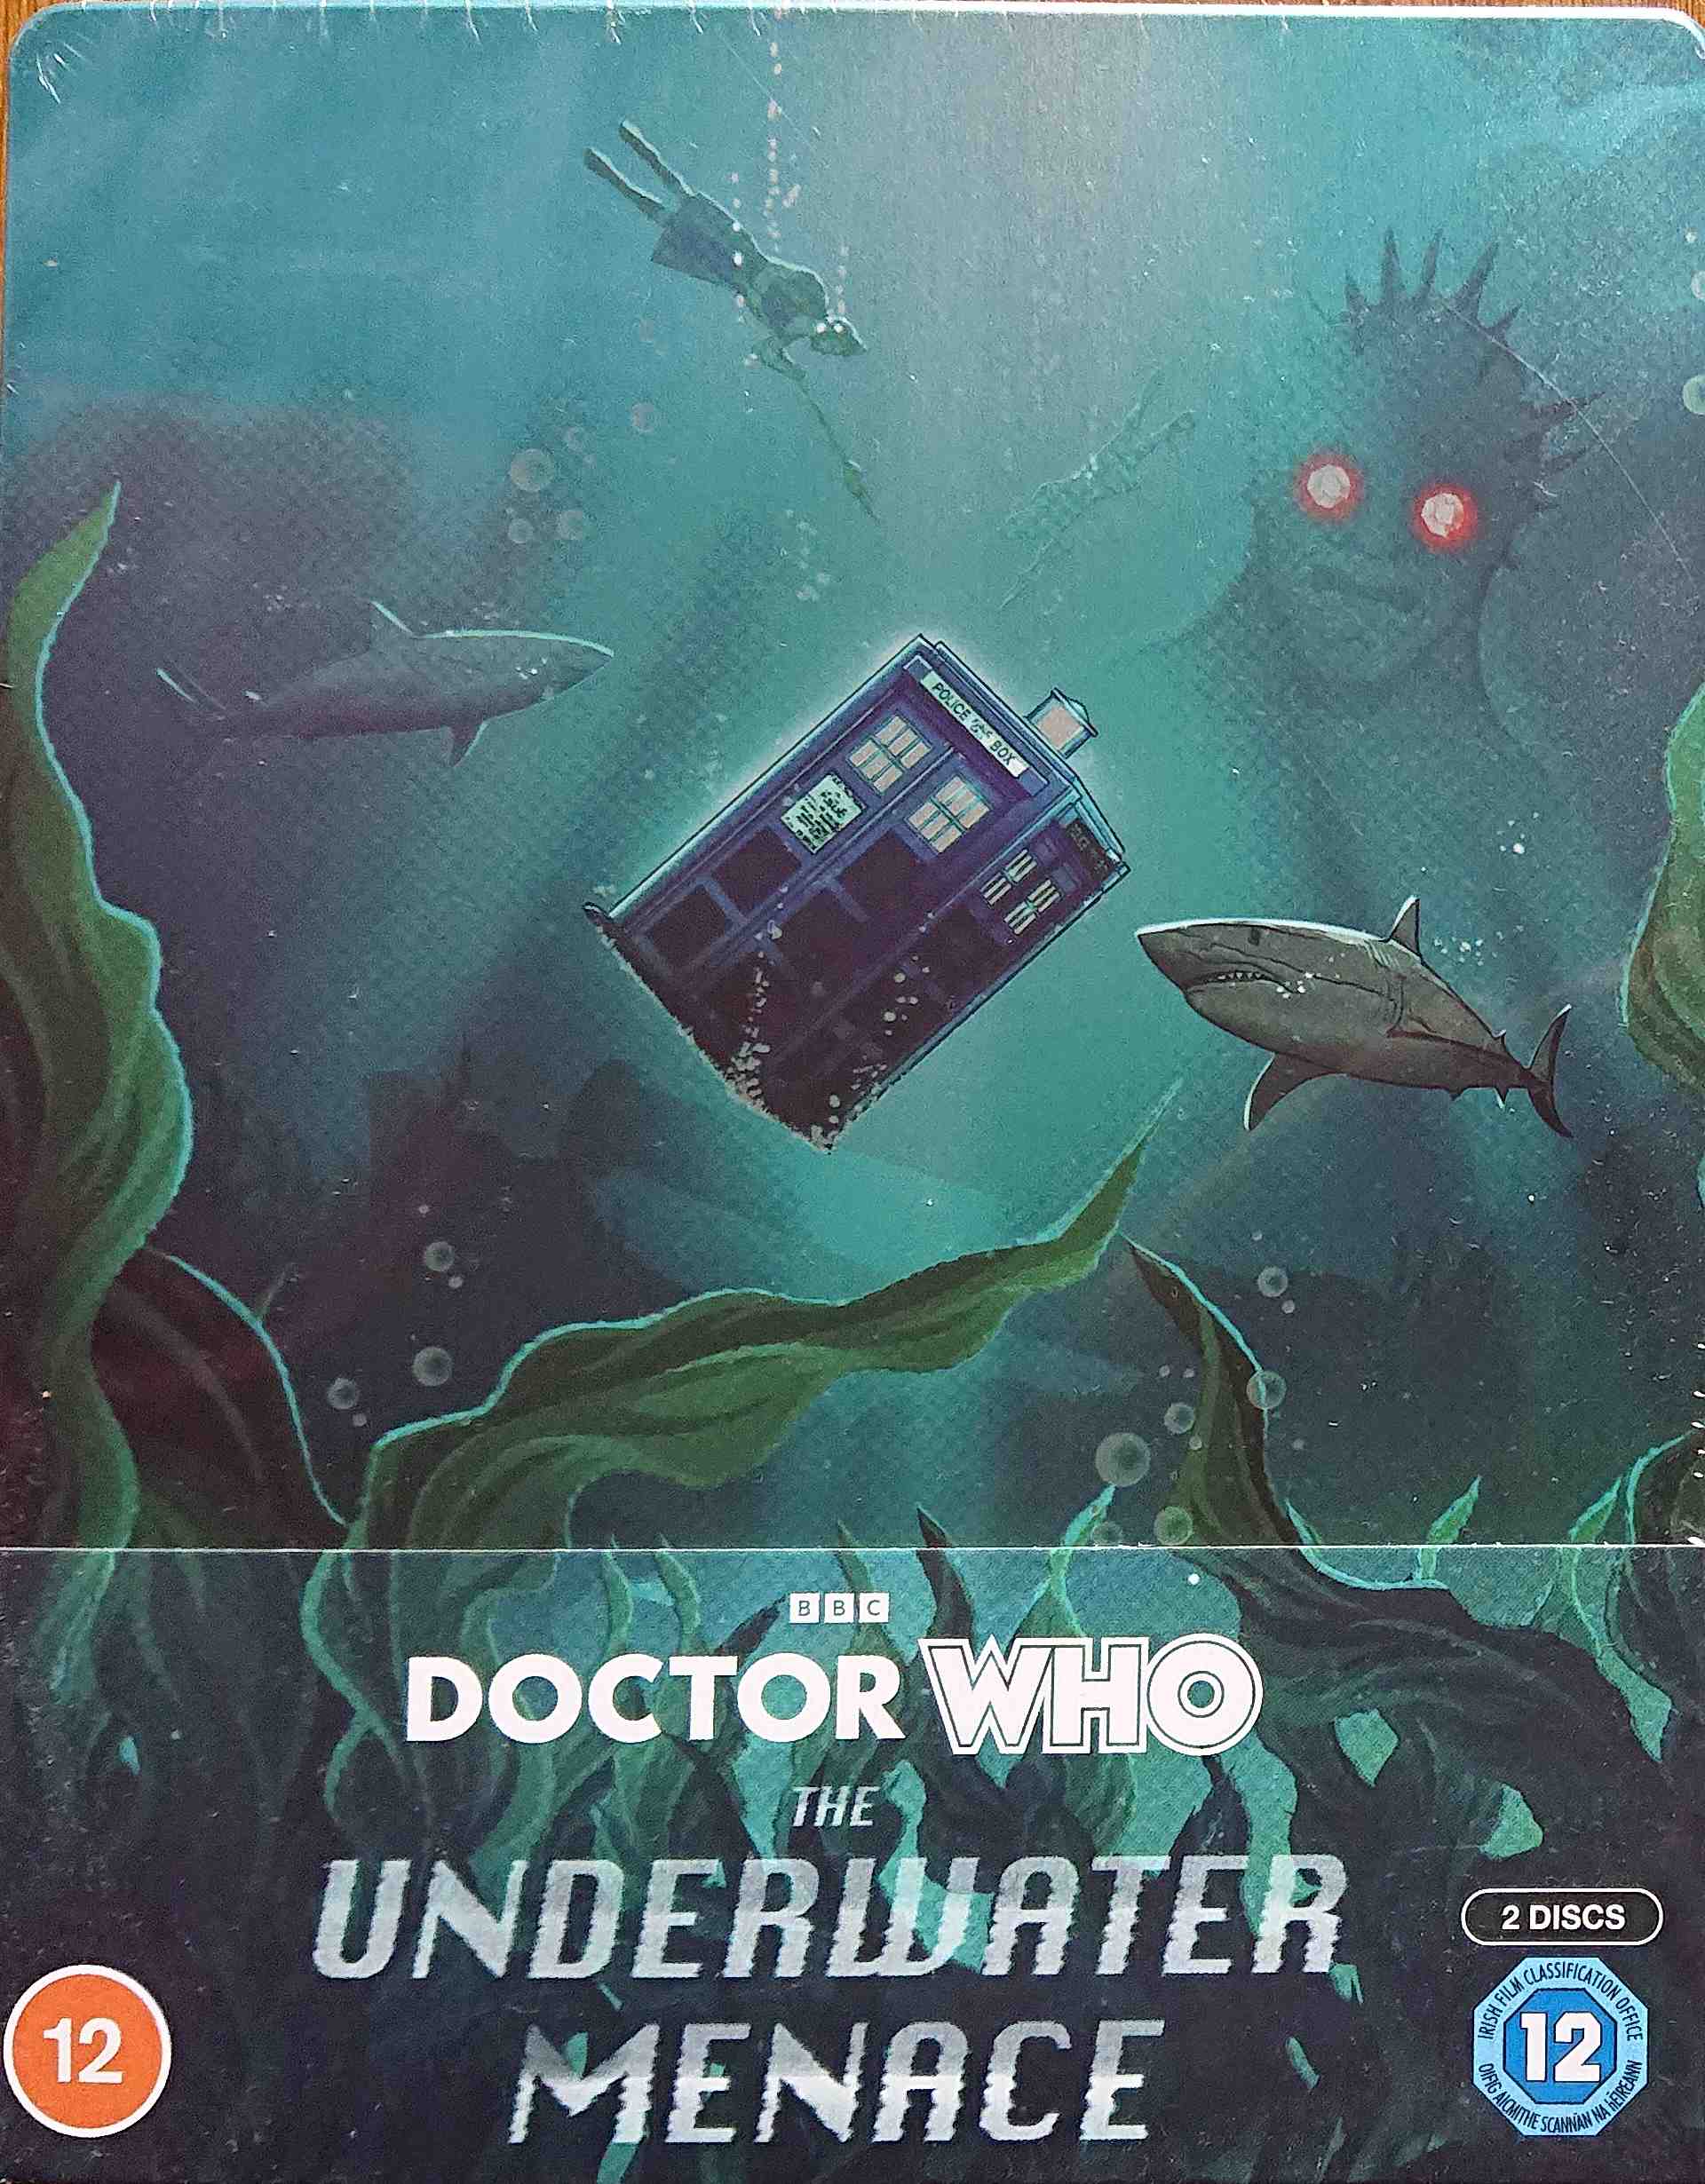 Picture of Doctor Who - The underwater menace by artist Geoffrey Orme from the BBC blu-rays - Records and Tapes library